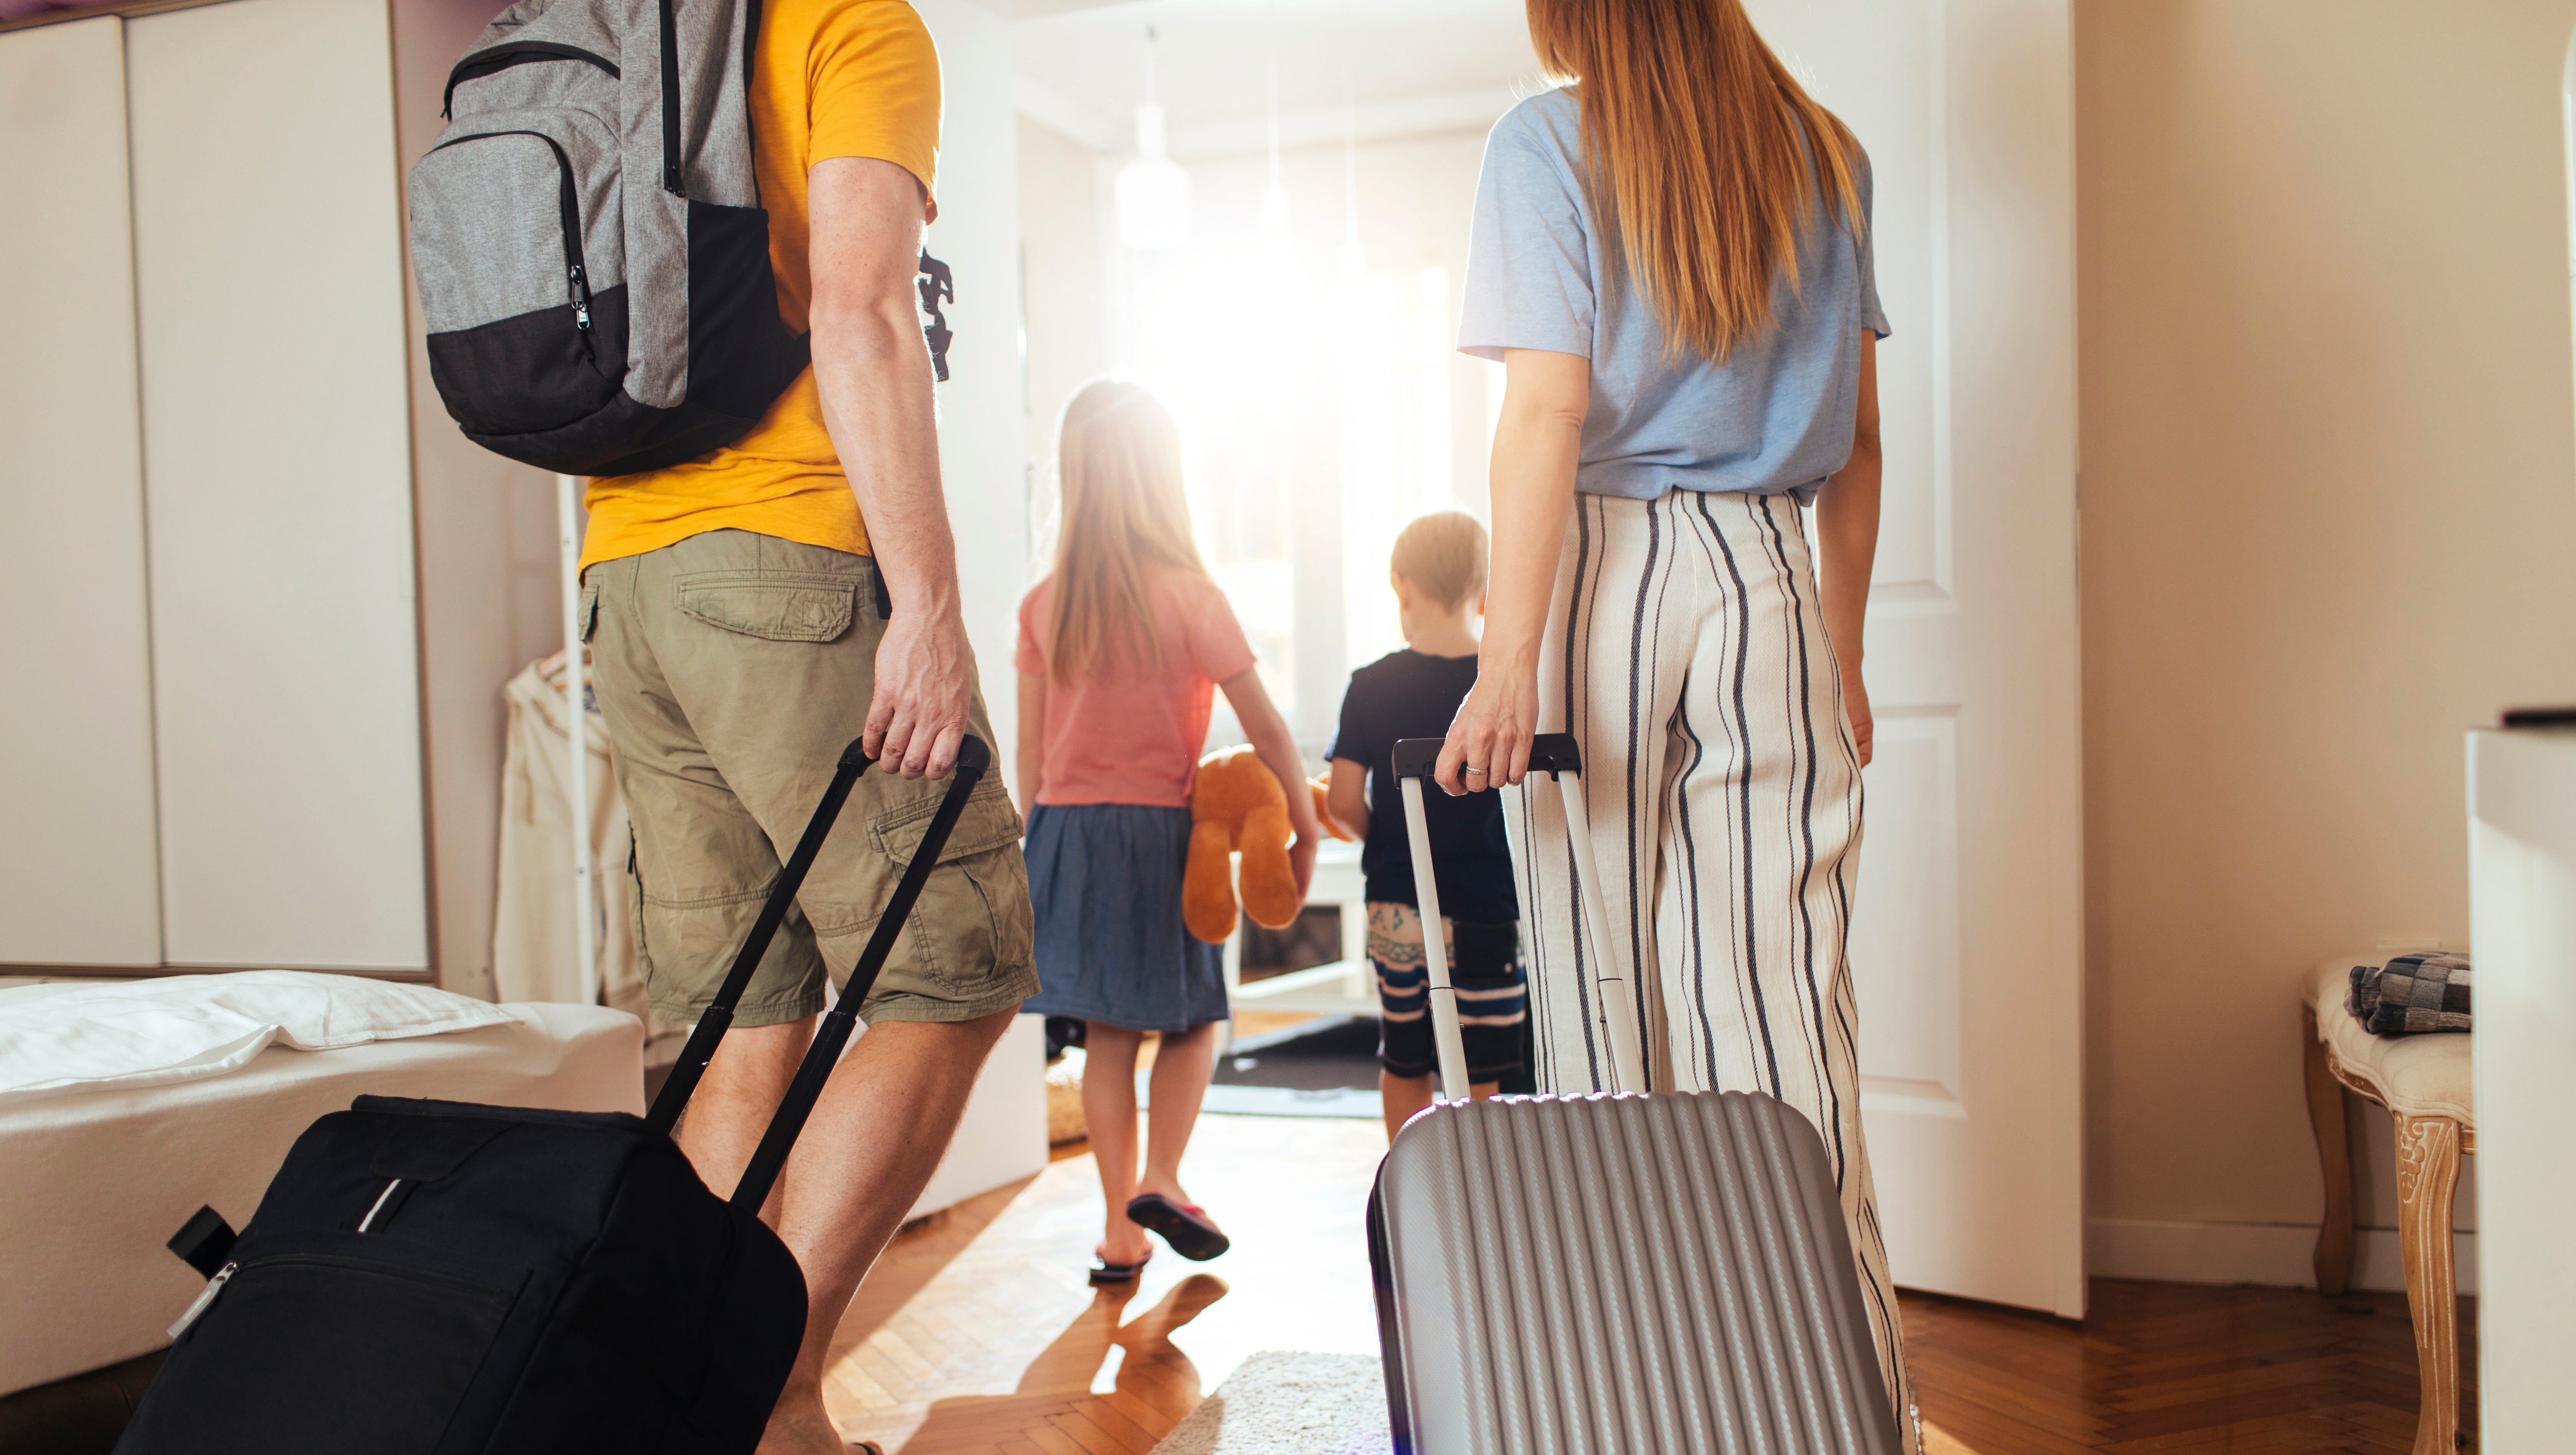 Family vacations can get pricey because nearly every expense gets multiplied.